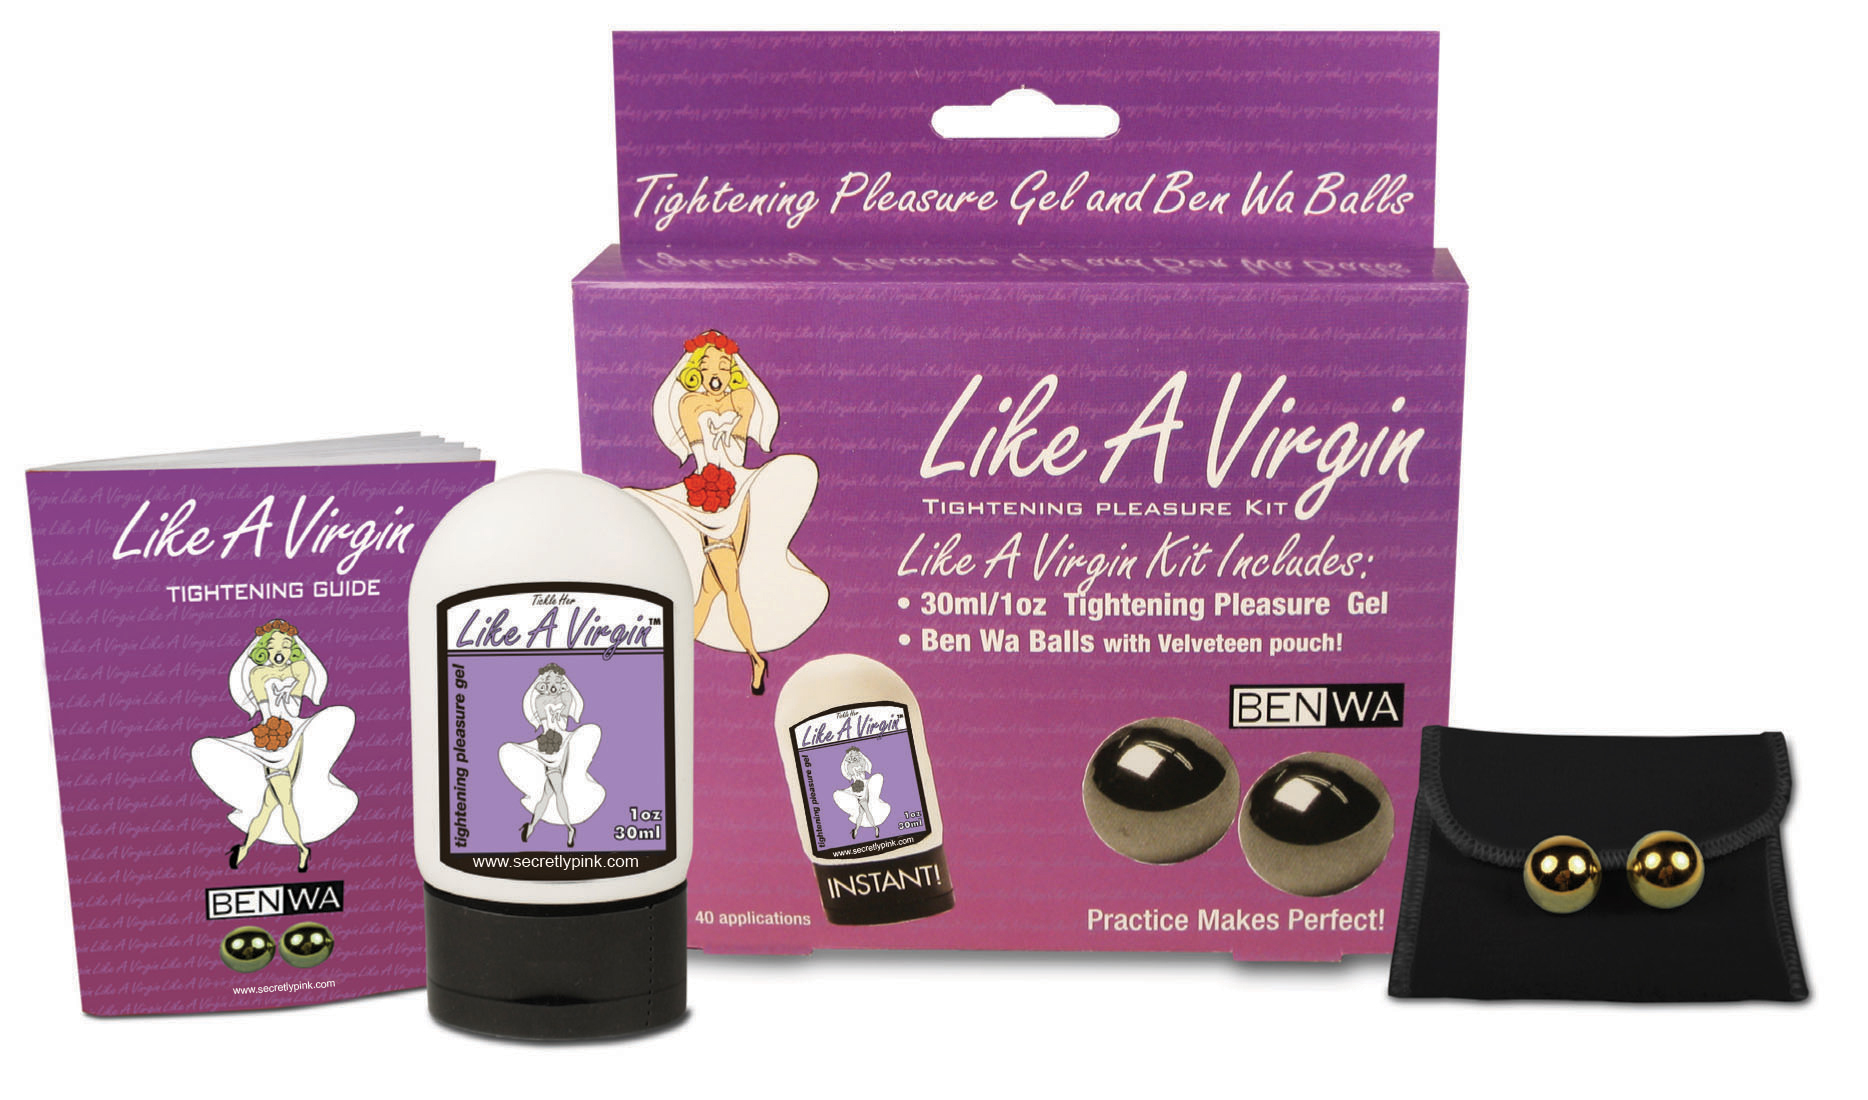 Sensual pleasure kit that's great for couples and features tightening ...